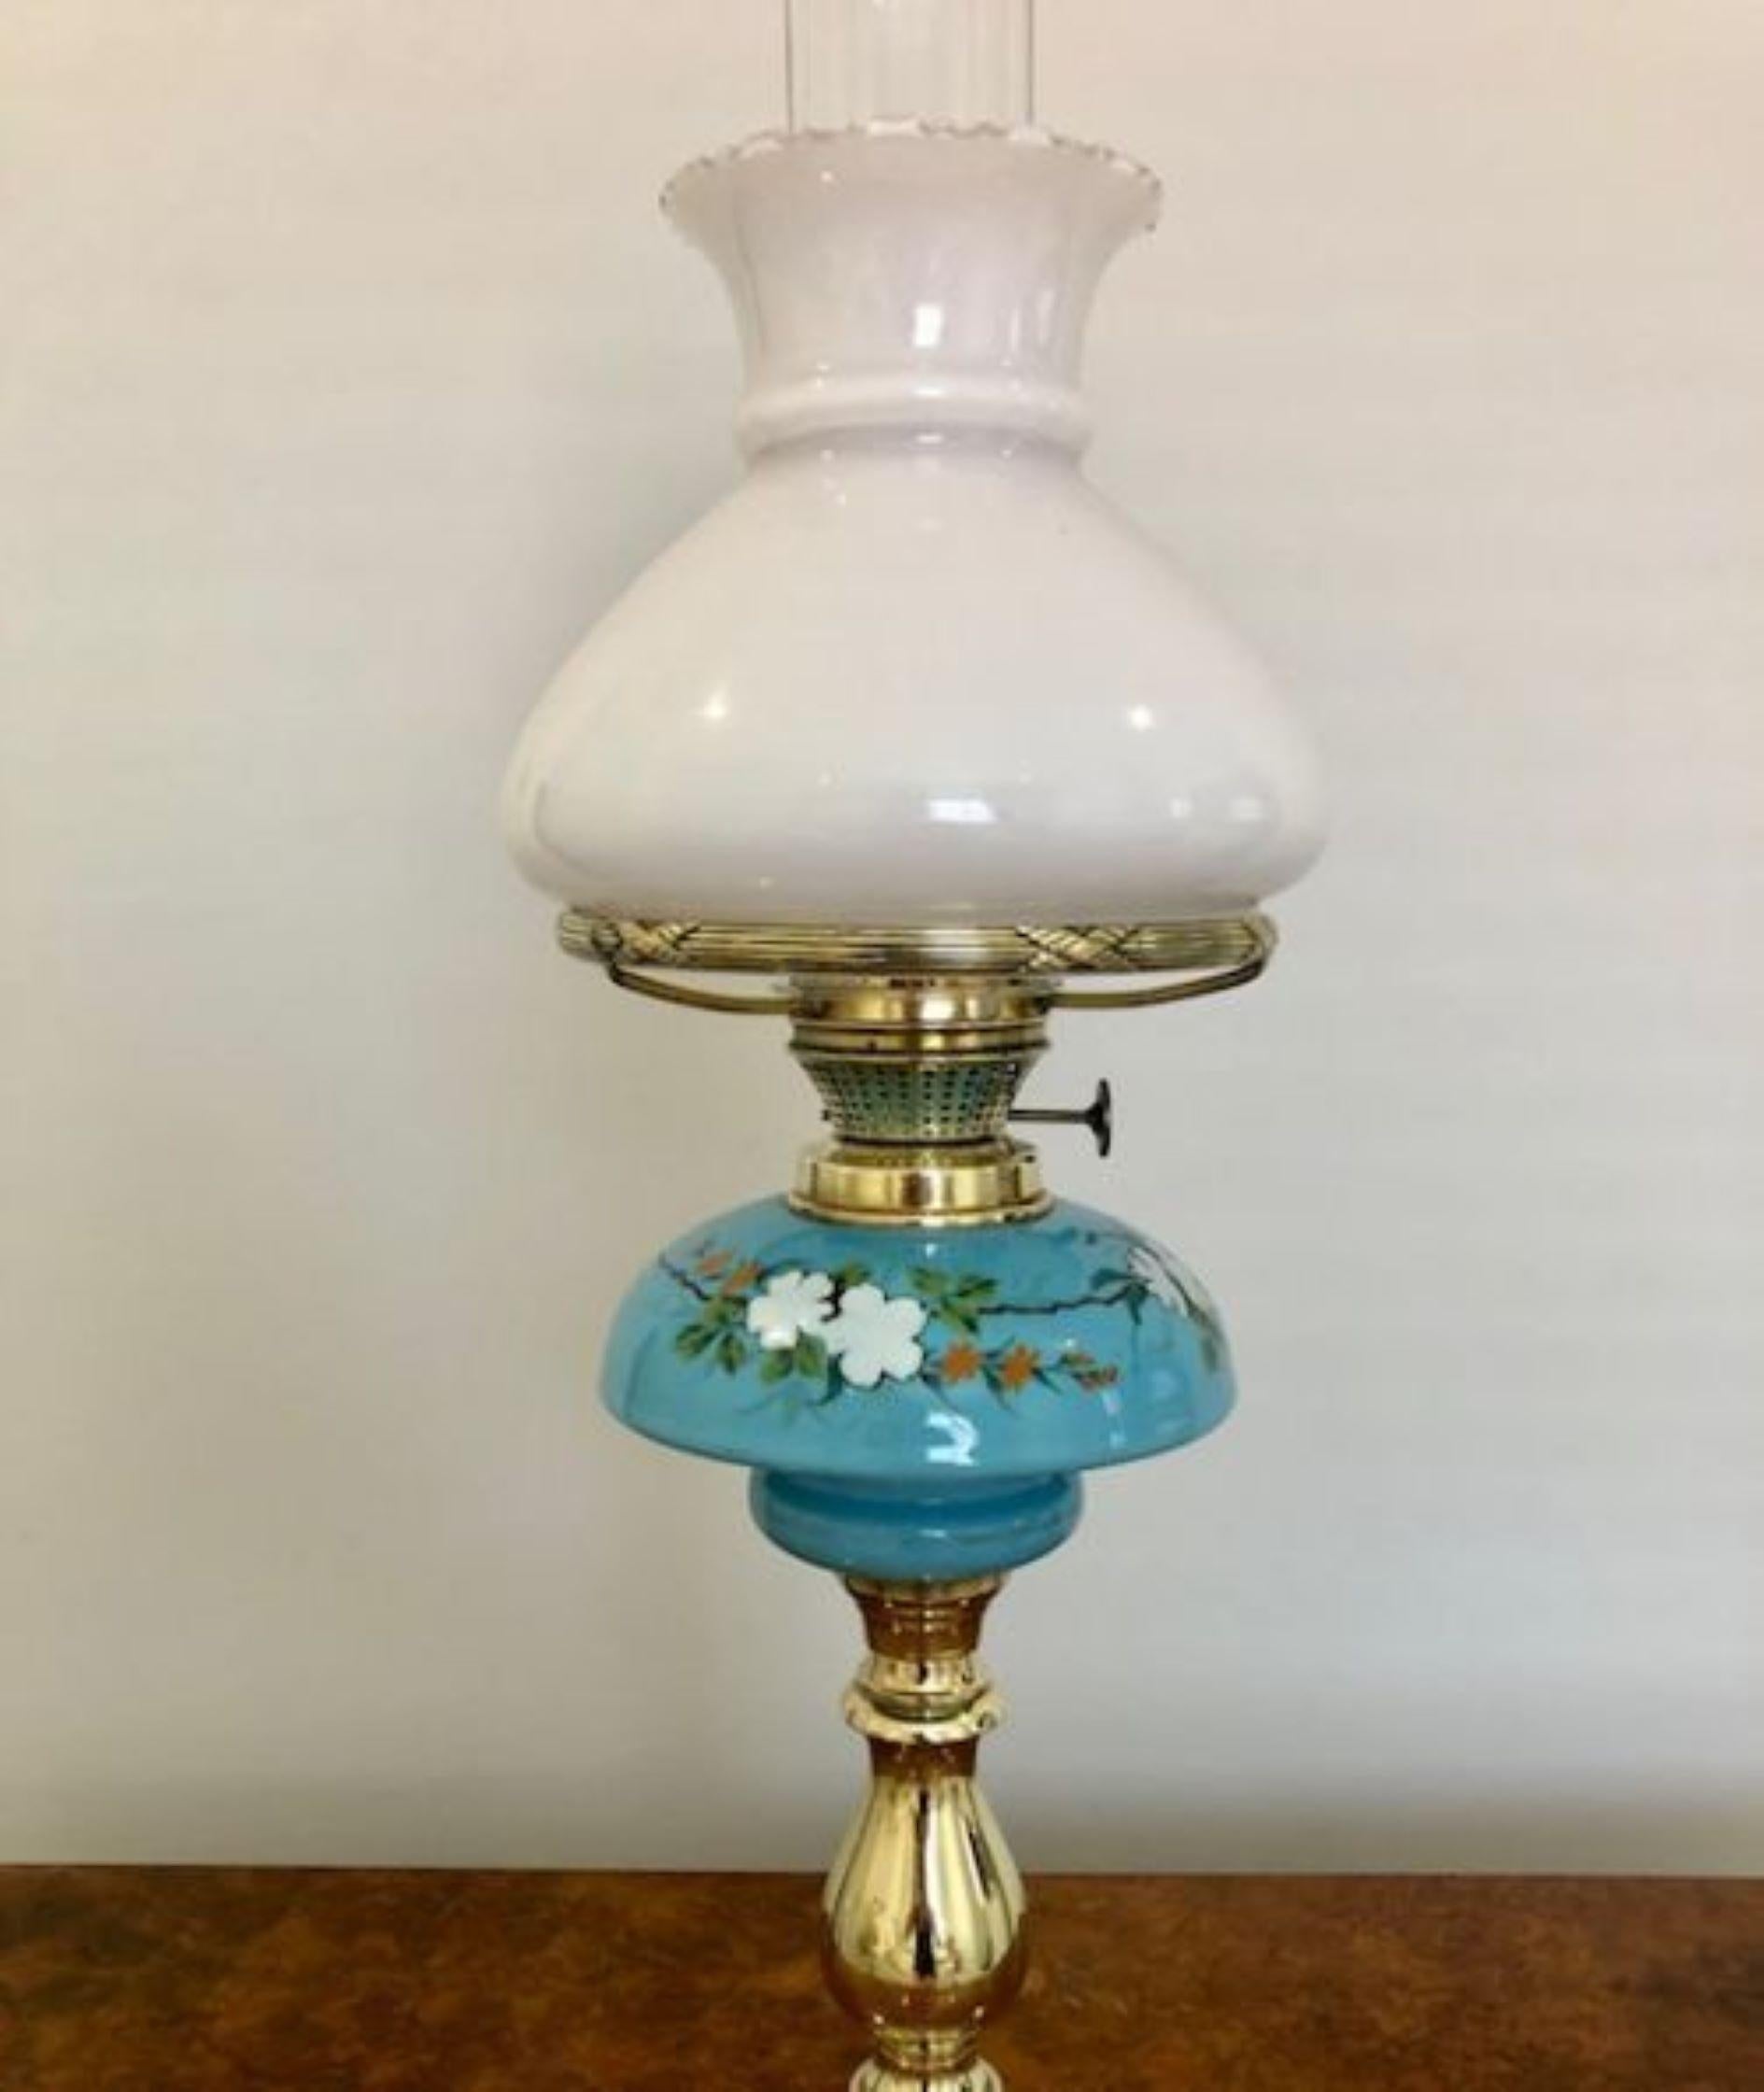 Quality antique Victorian brass oil lamp having the original white glass shade with a blue ceramic reservoir  supported by an ornate brass column 